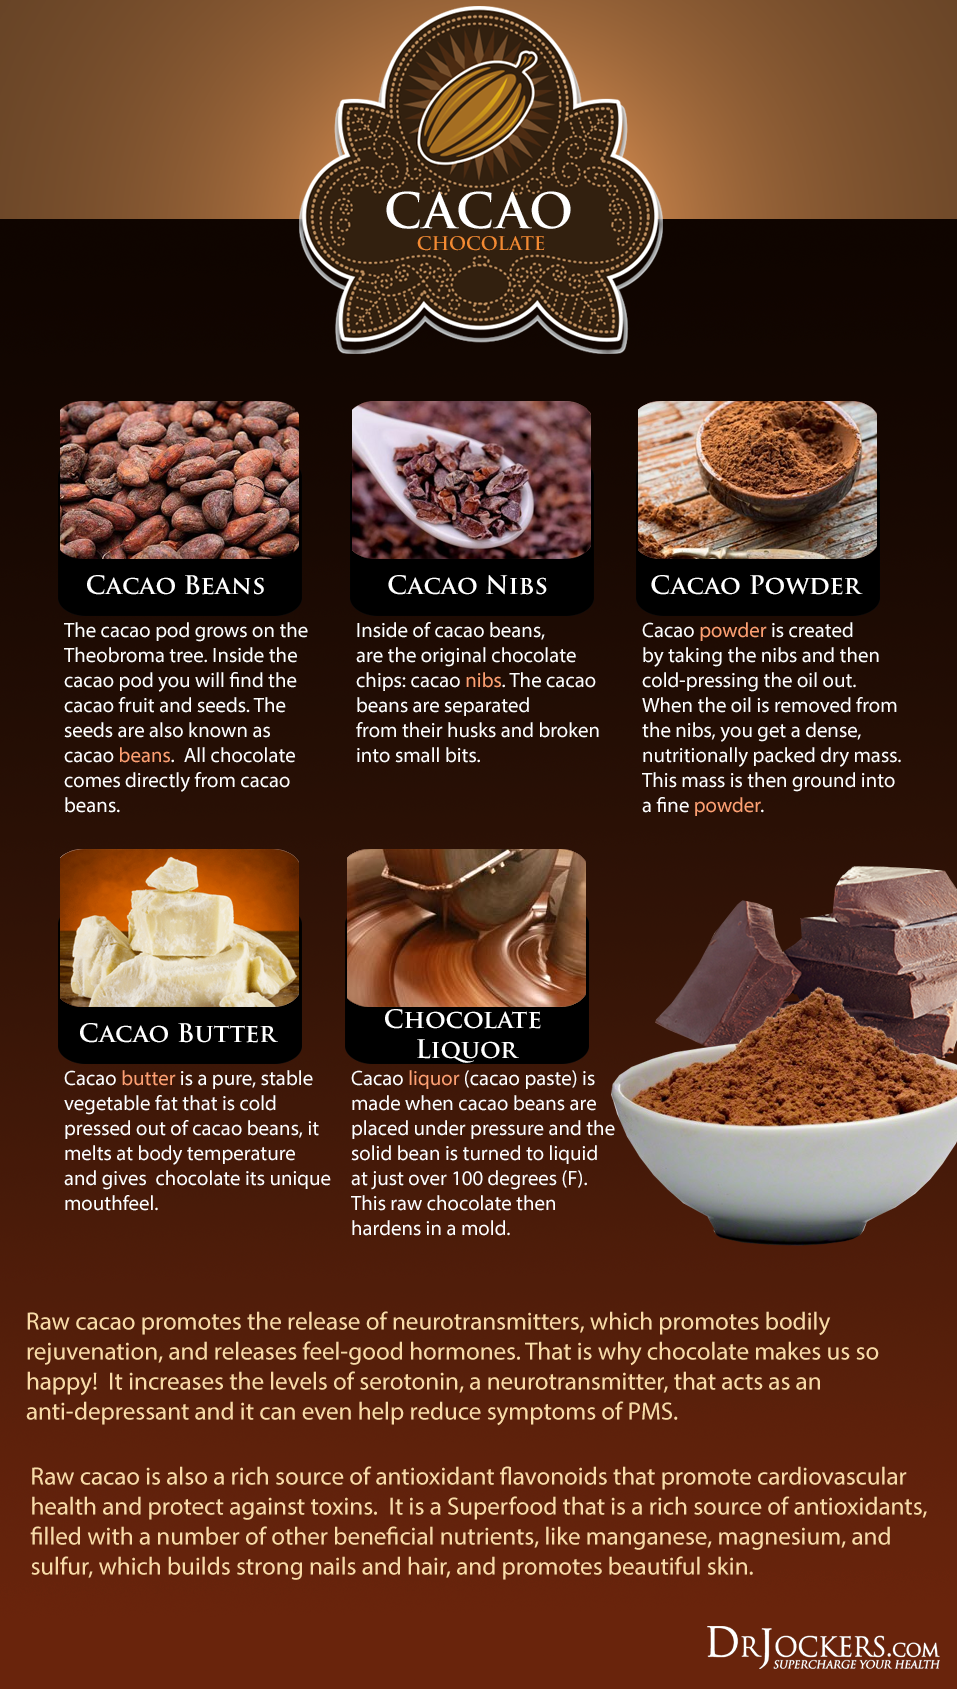 Is Raw Cacao a Stimulant?